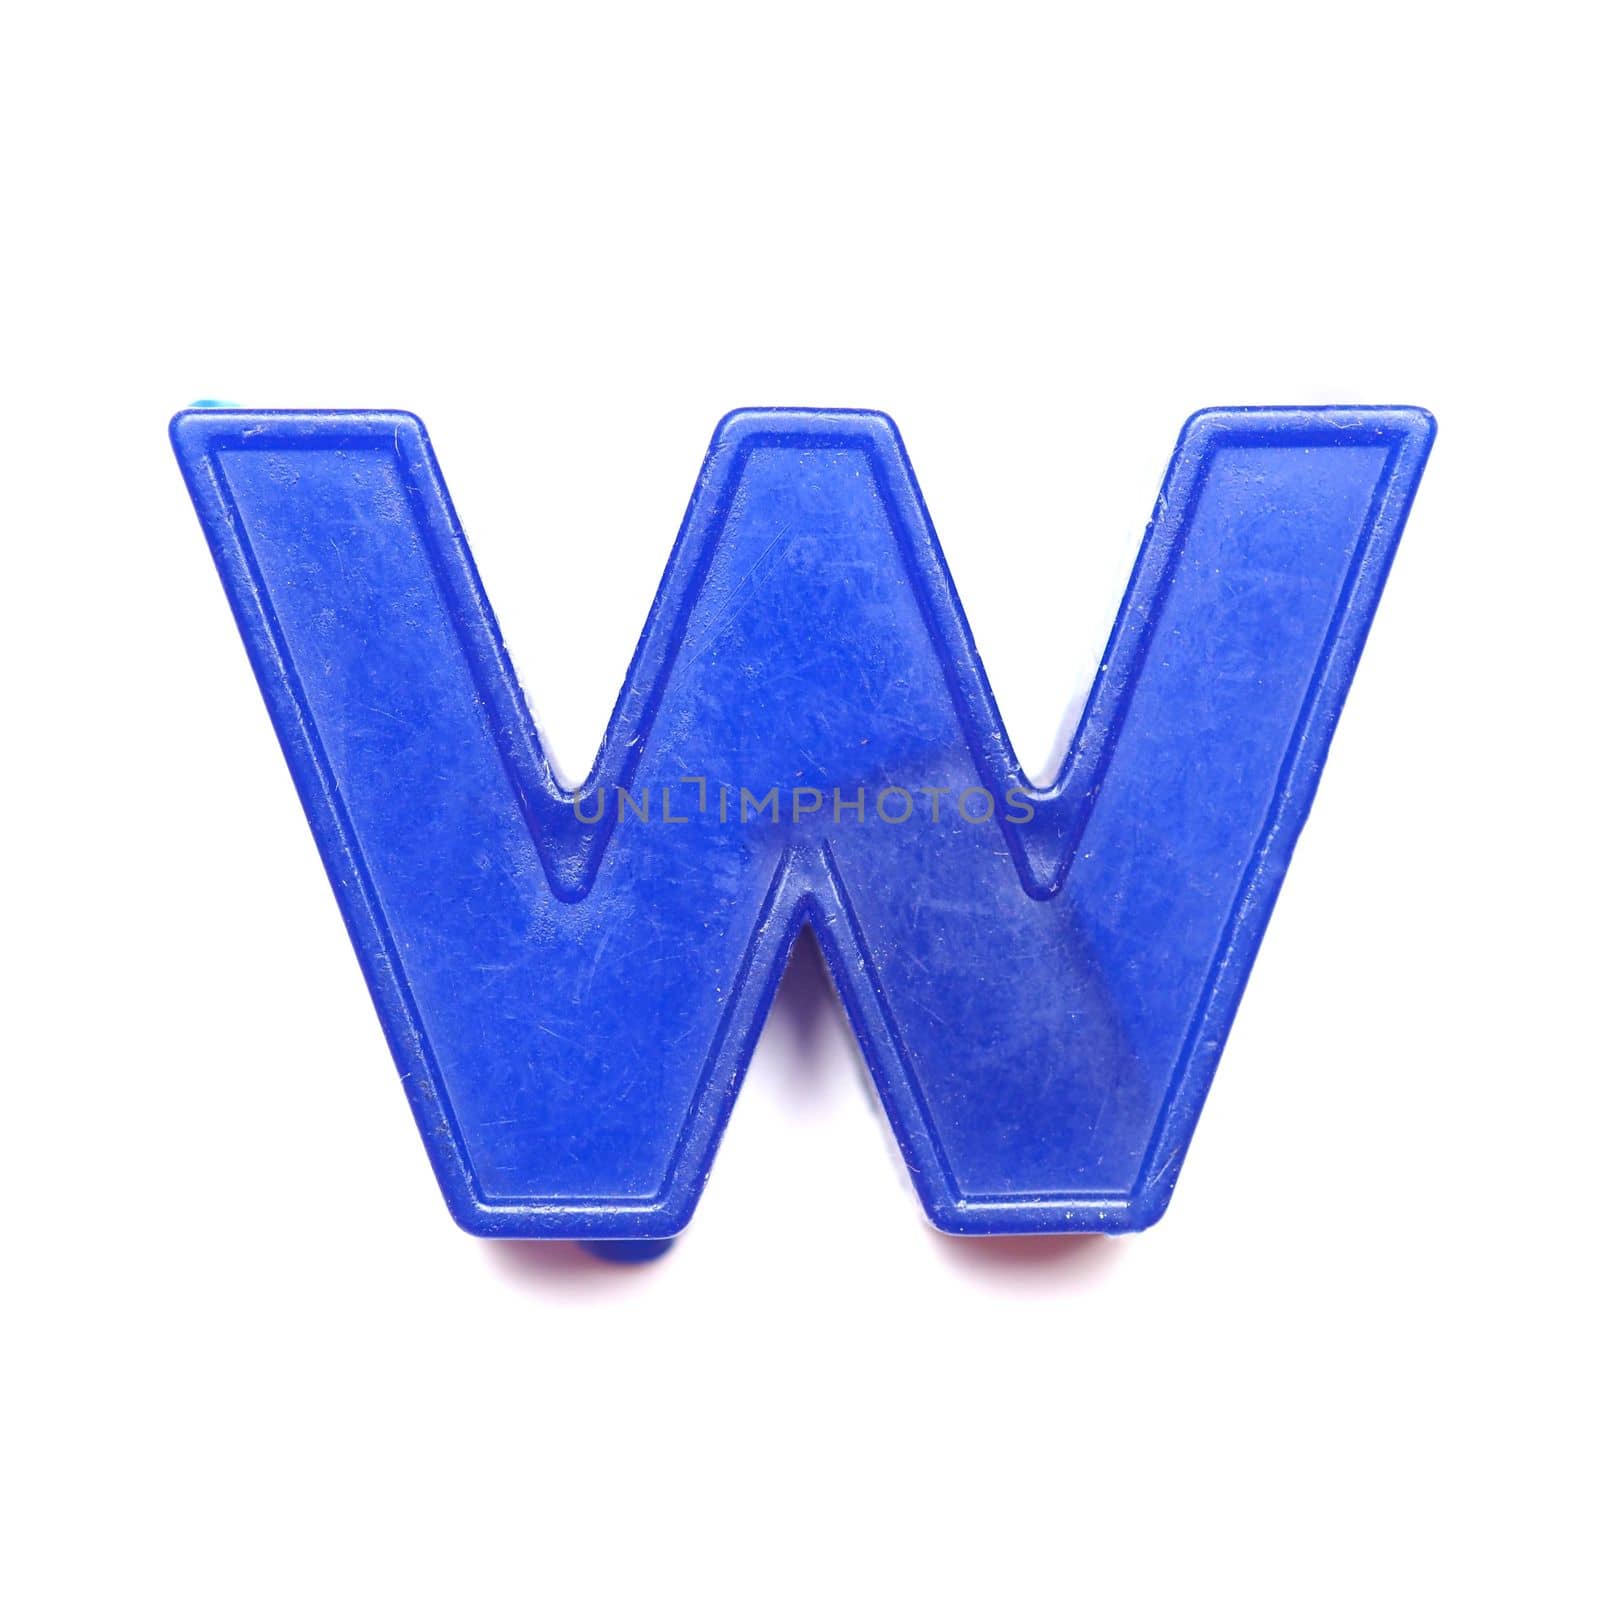 Magnetic lowercase letter W of the British alphabet